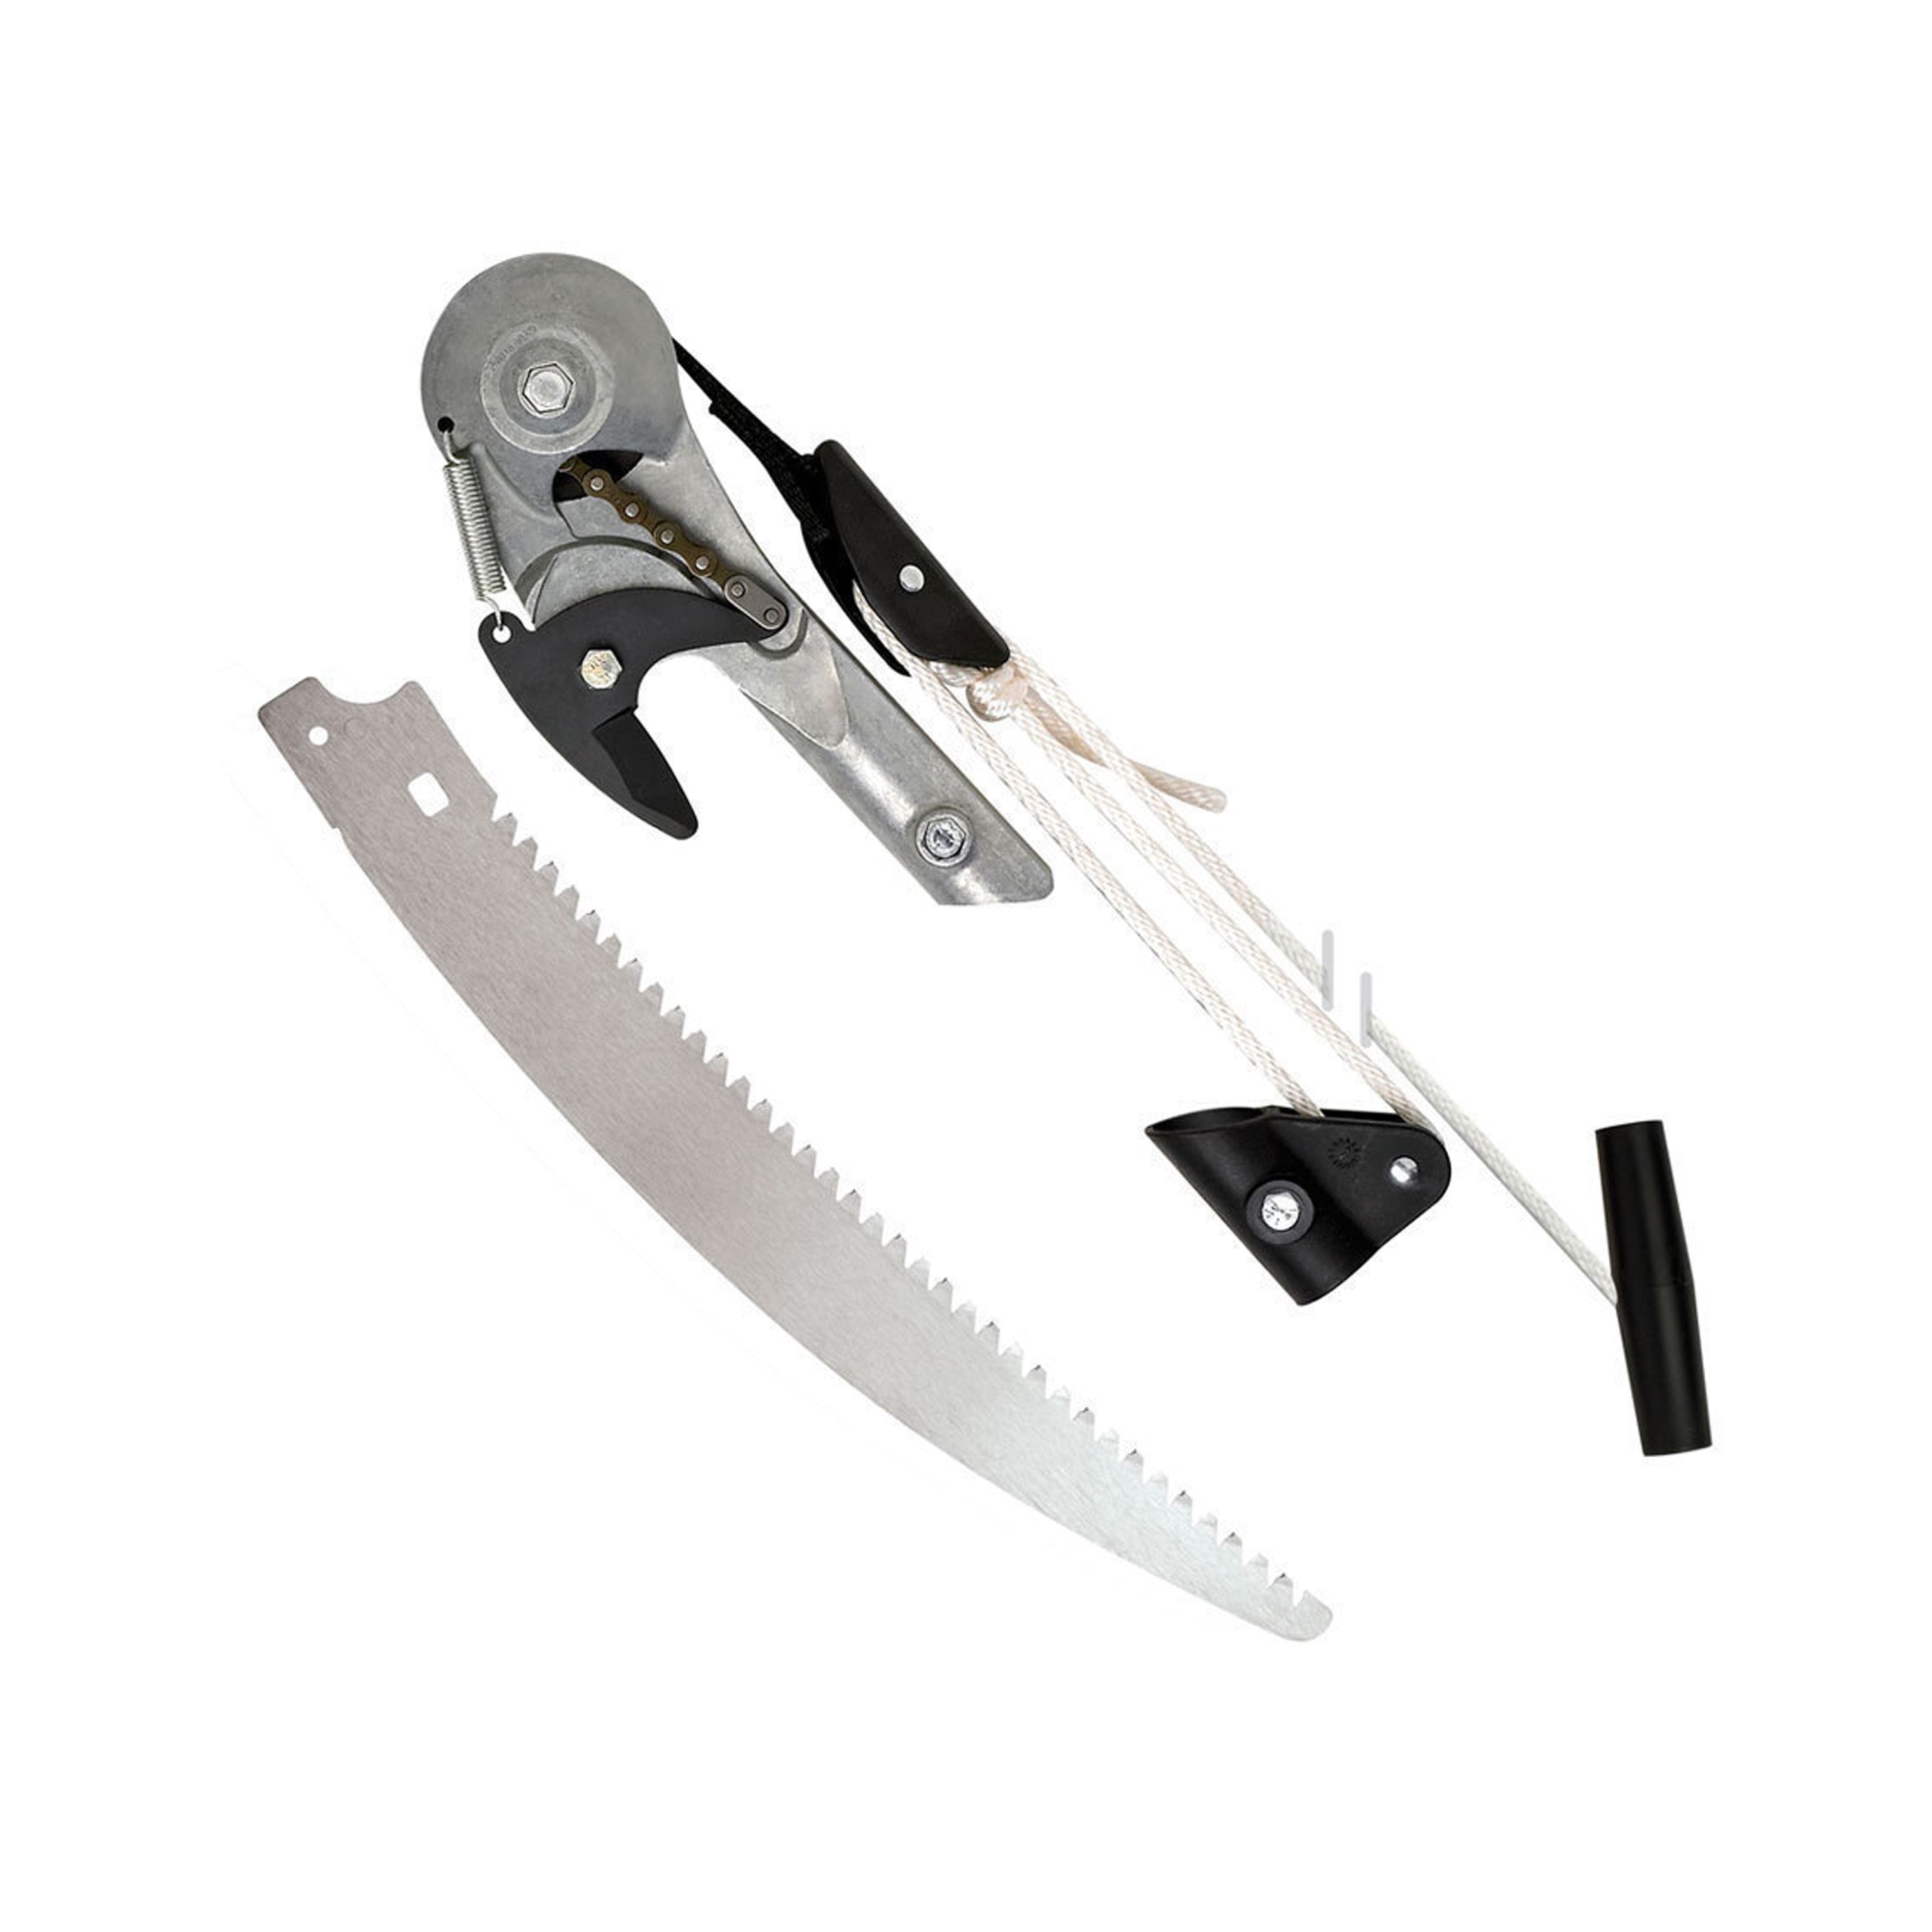 Fiskars Chain Drive Extendable Pole Saw | peacecommission.kdsg.gov.ng